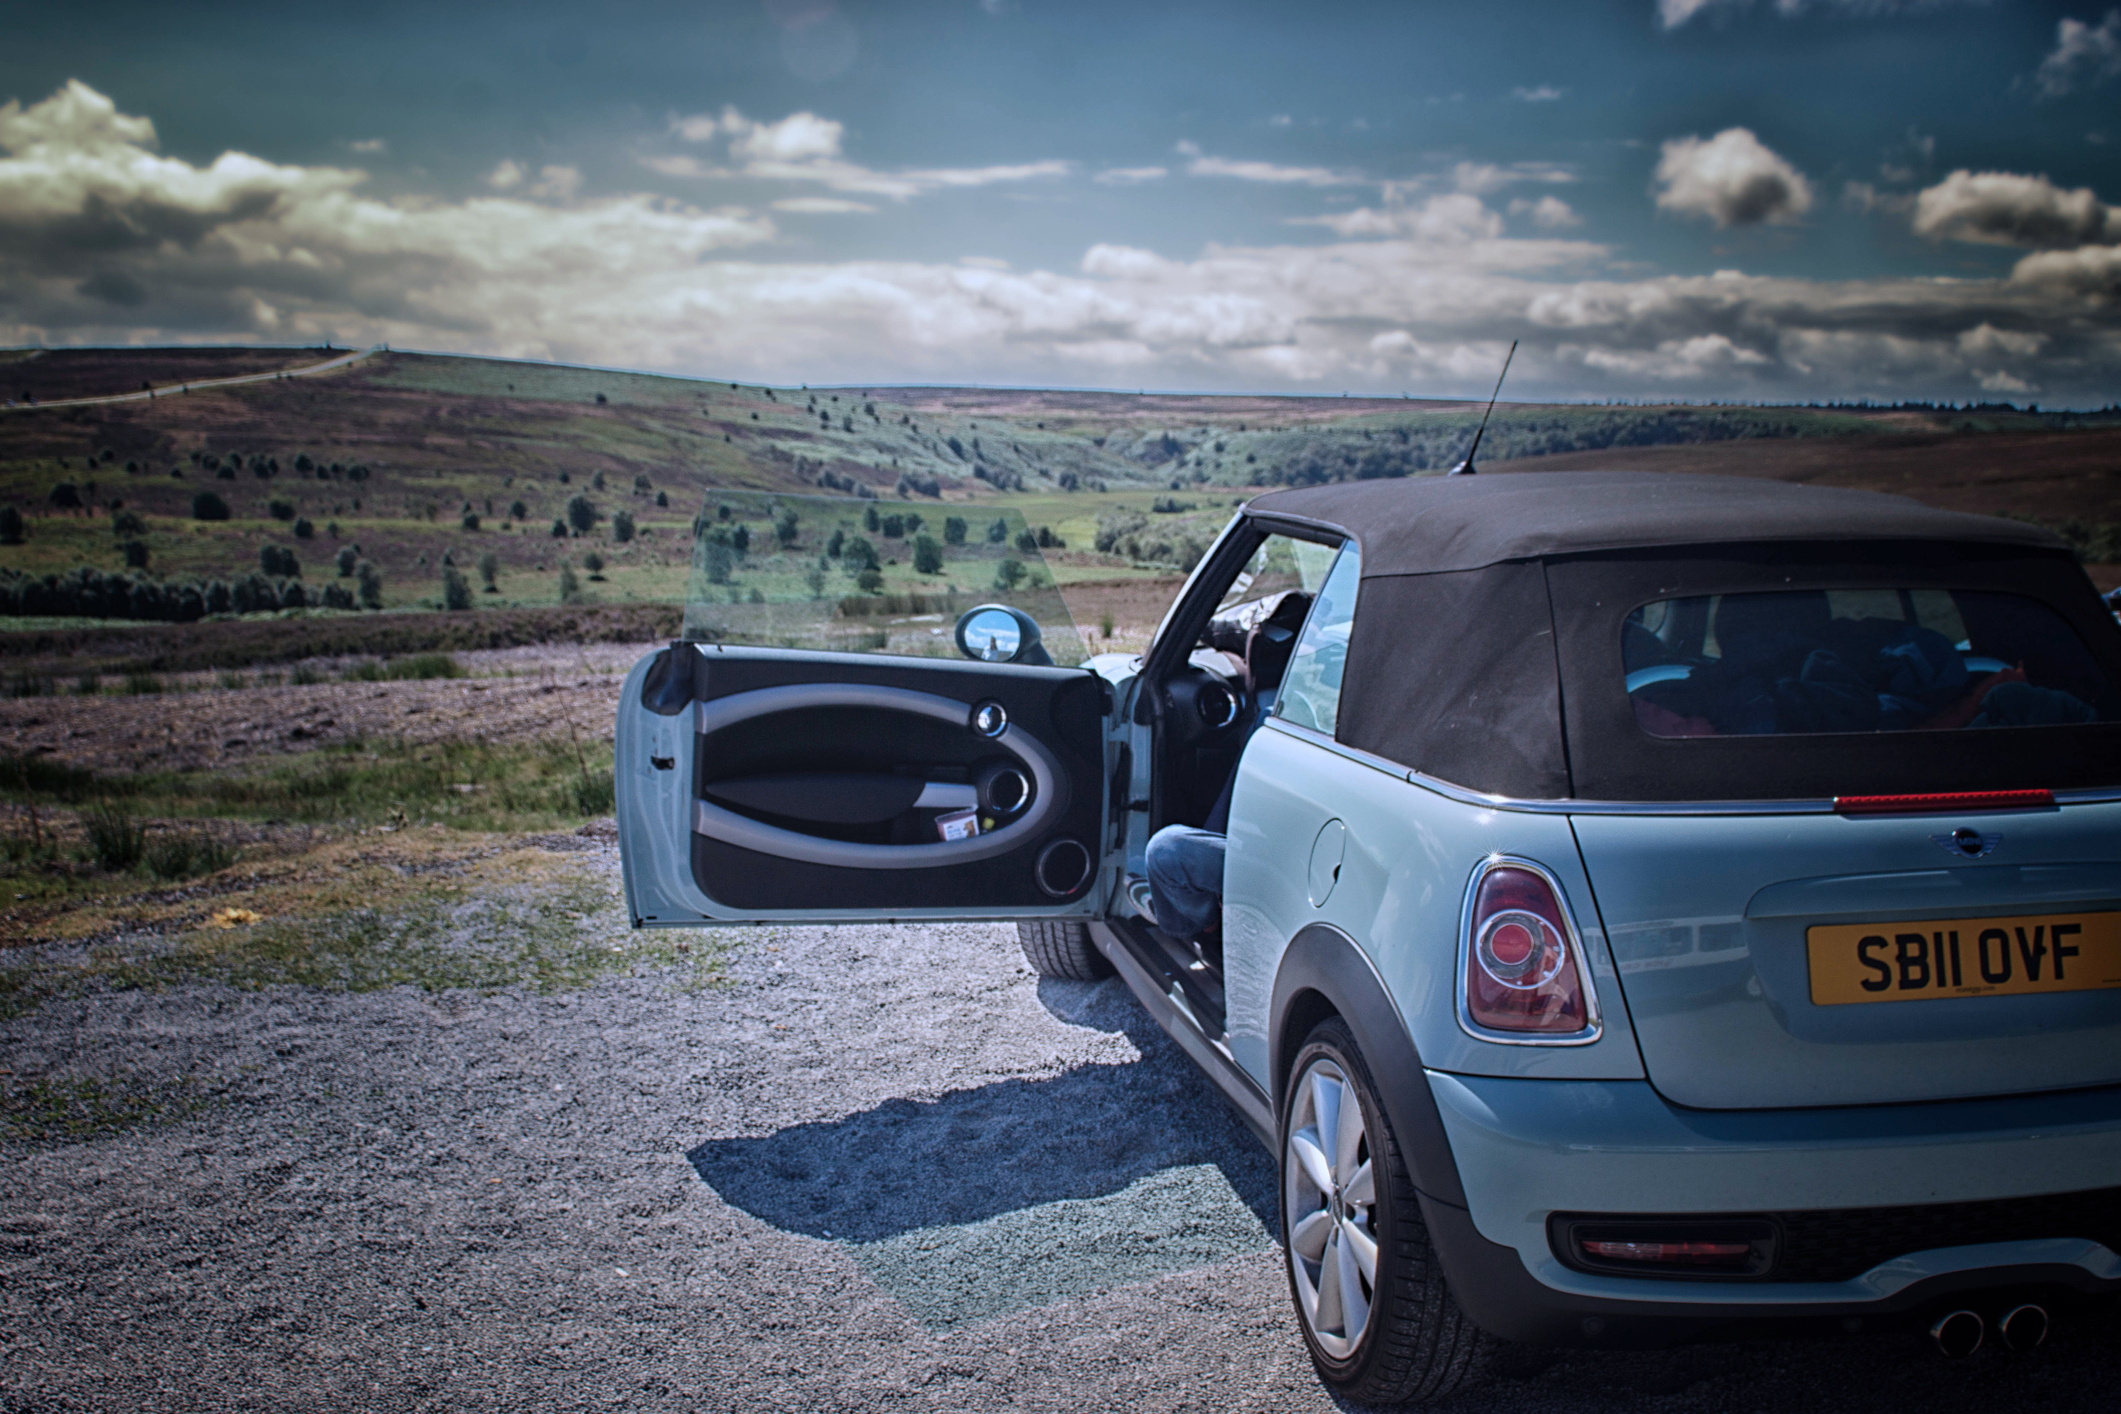 A BMW Mini Cooper convertible in a lay. The door is open and there are cumulus clouds on a bright summer's day.